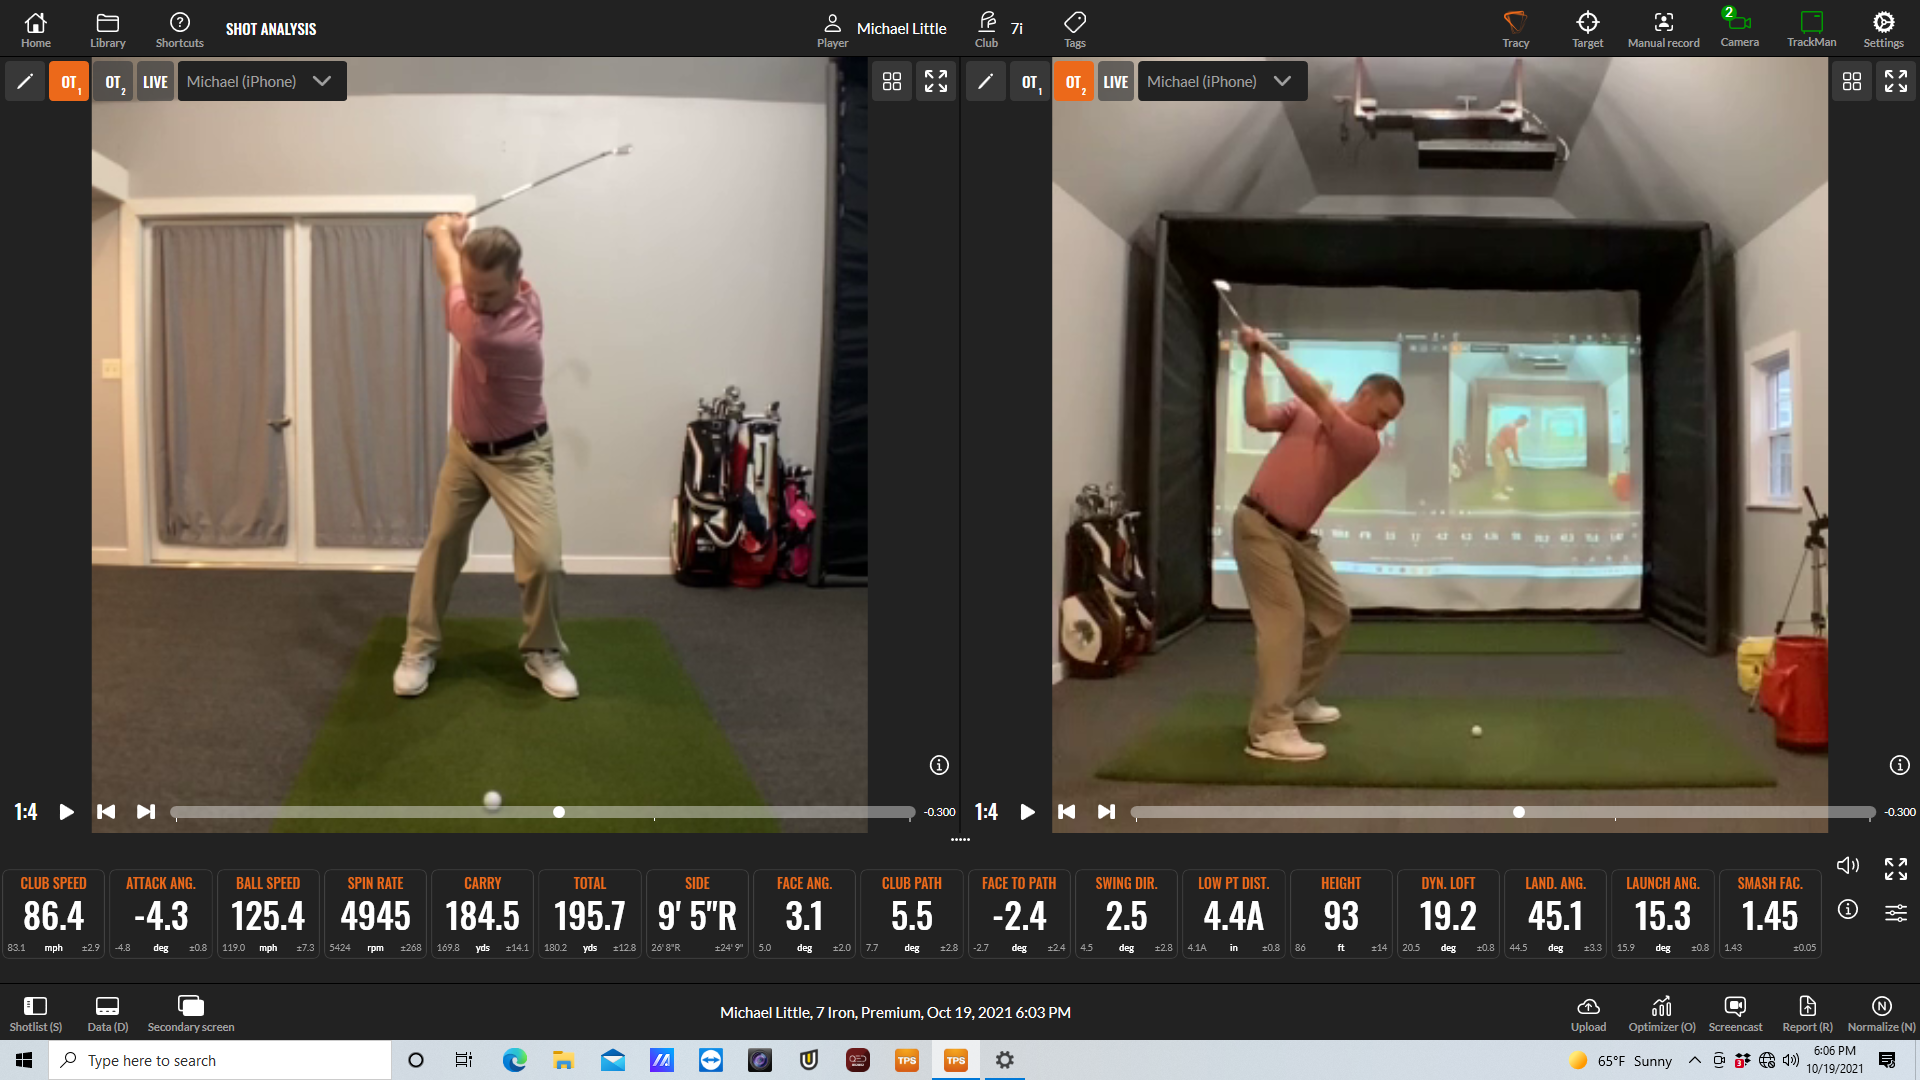 Trackman Video Swing Ananlysis 2.png